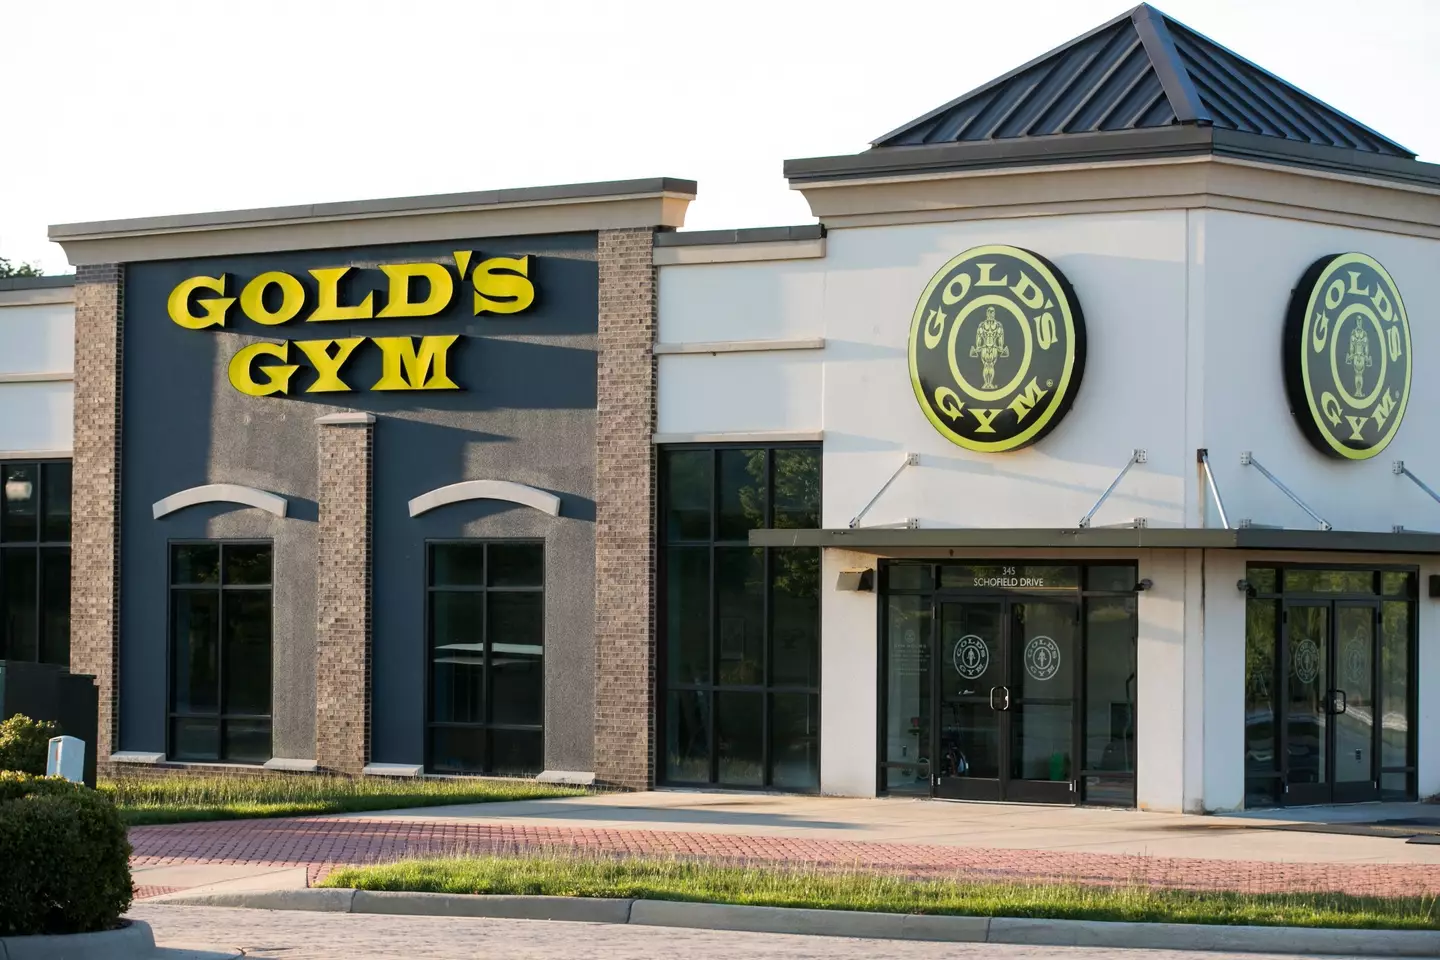 Schaller is the founder of the company which owns Gold's Gym.